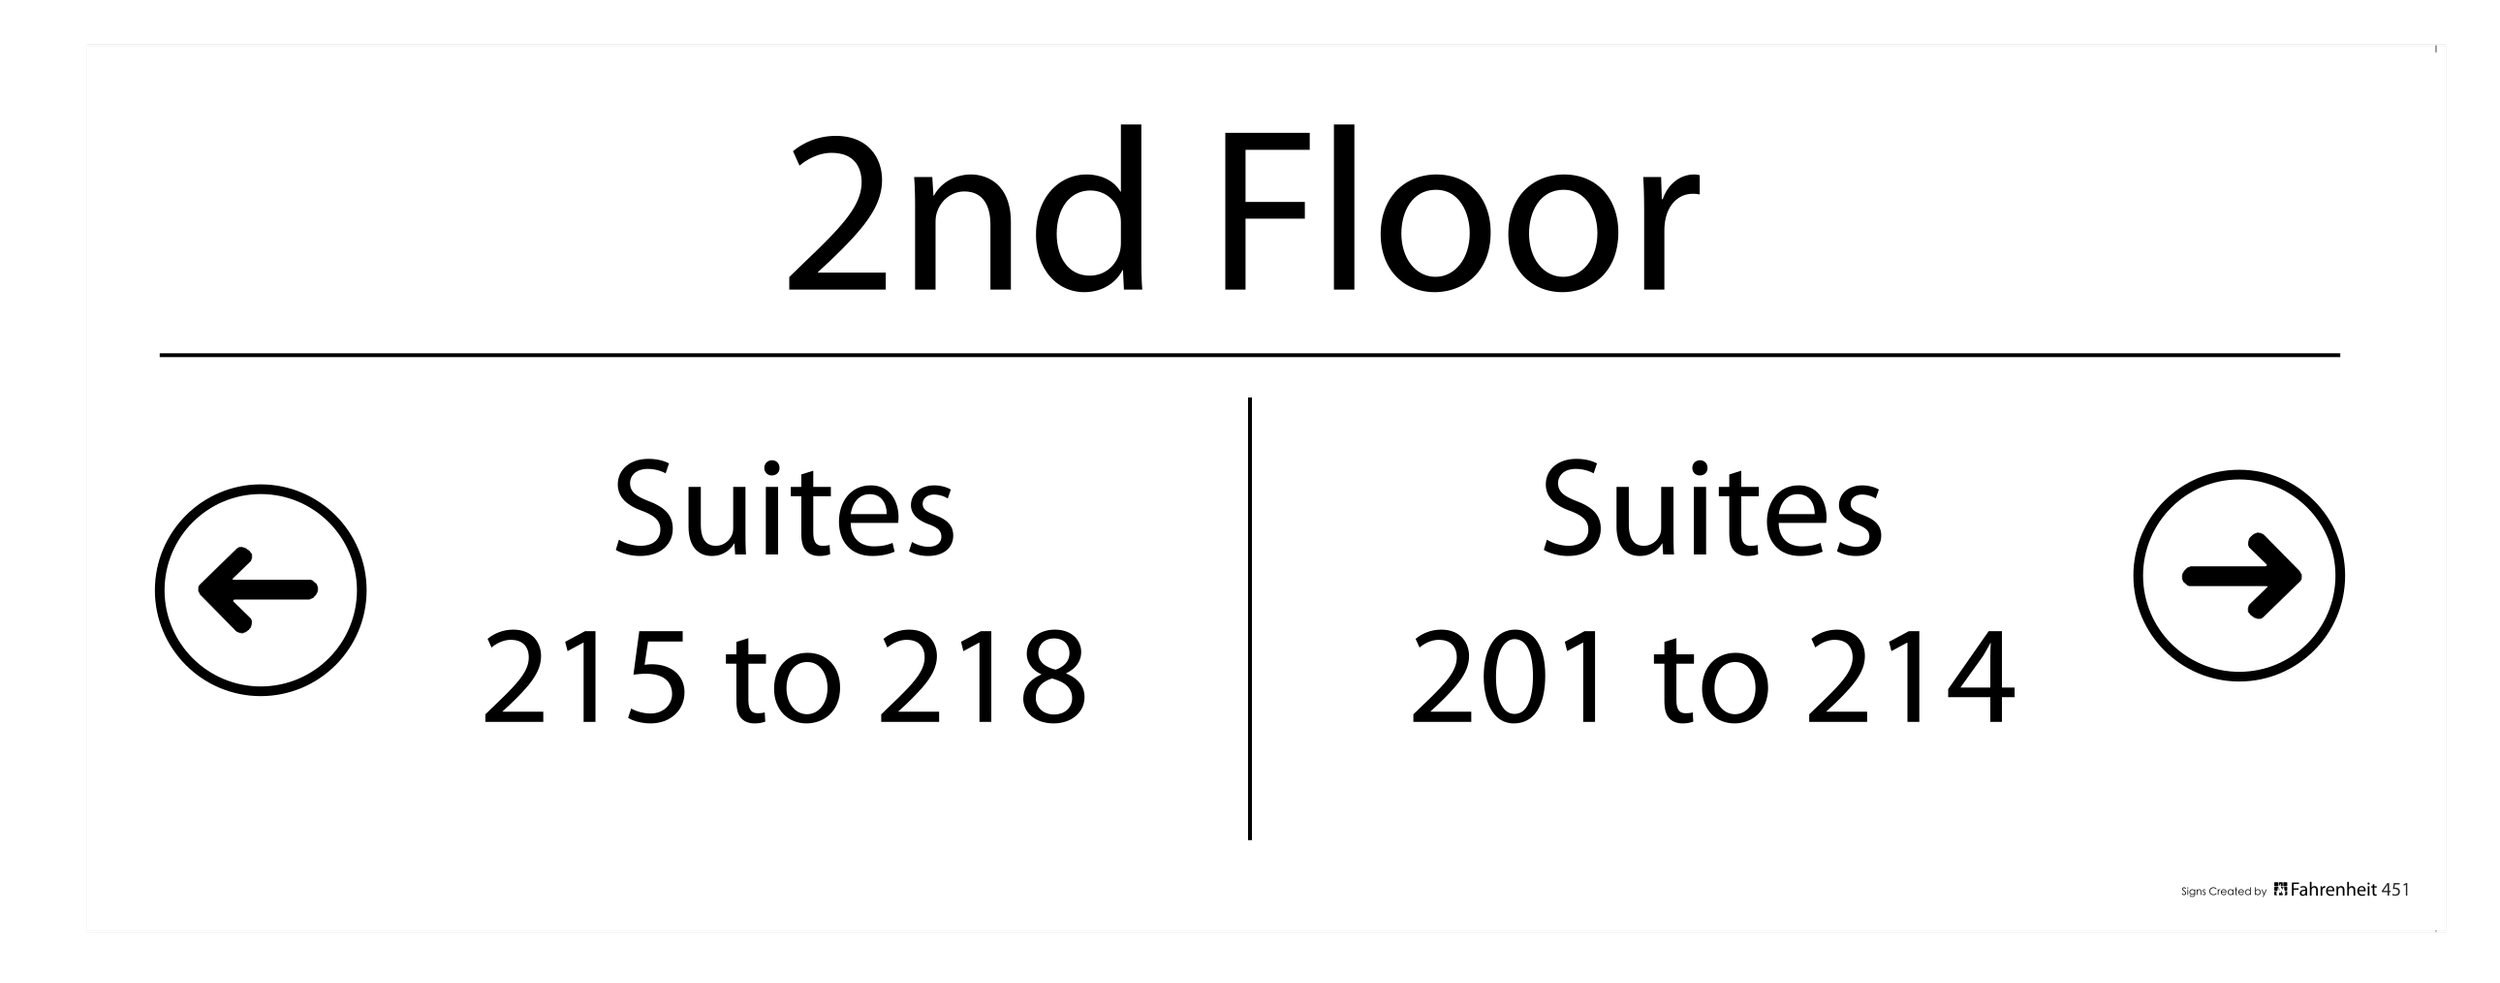 Capella 1 Directional Signage 2nd Floor.png